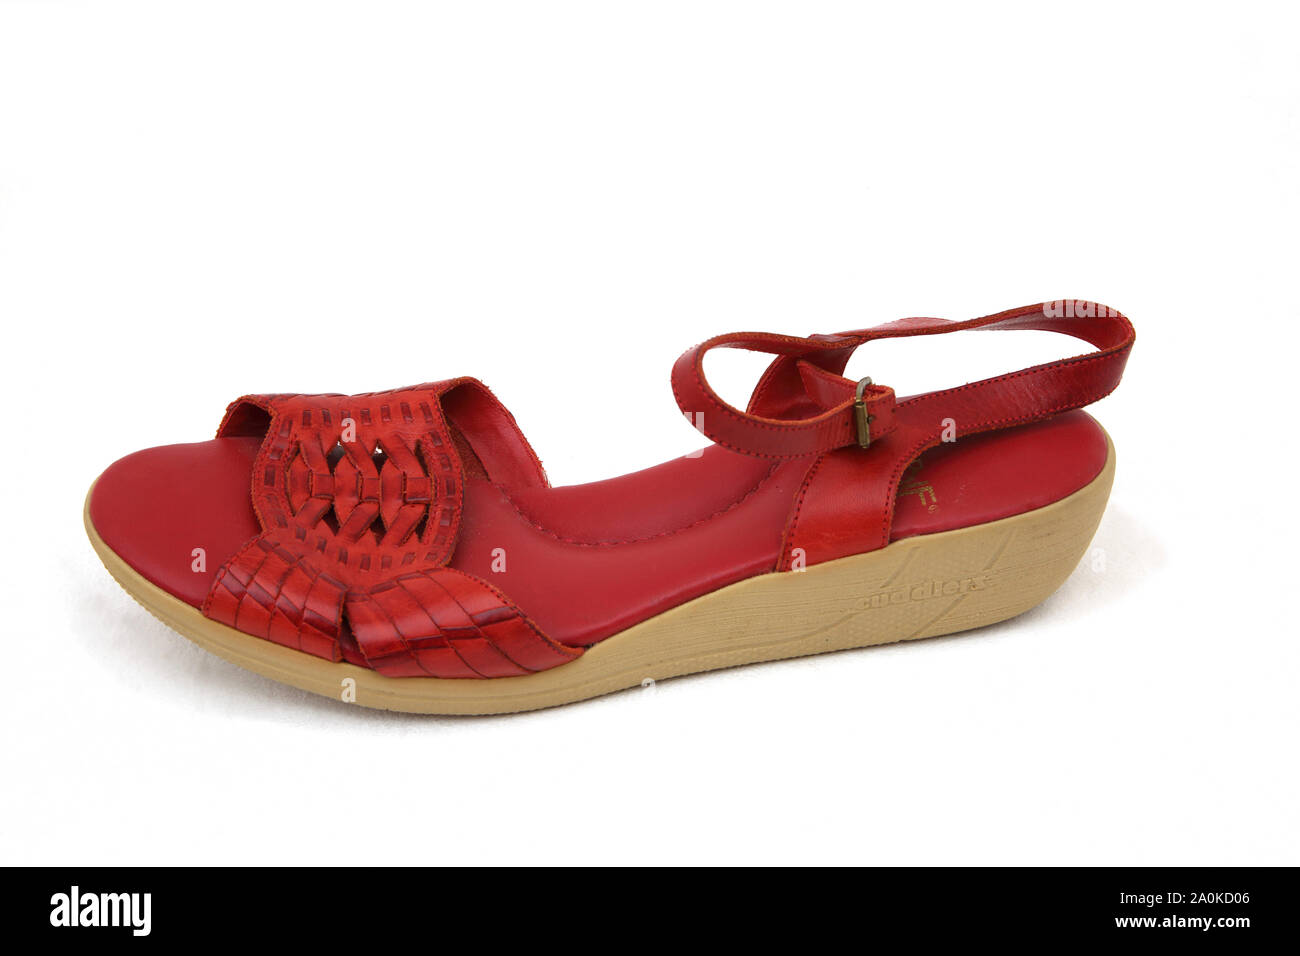 Red Leather open Toe Sandal with Wedge Heel Stock Photo